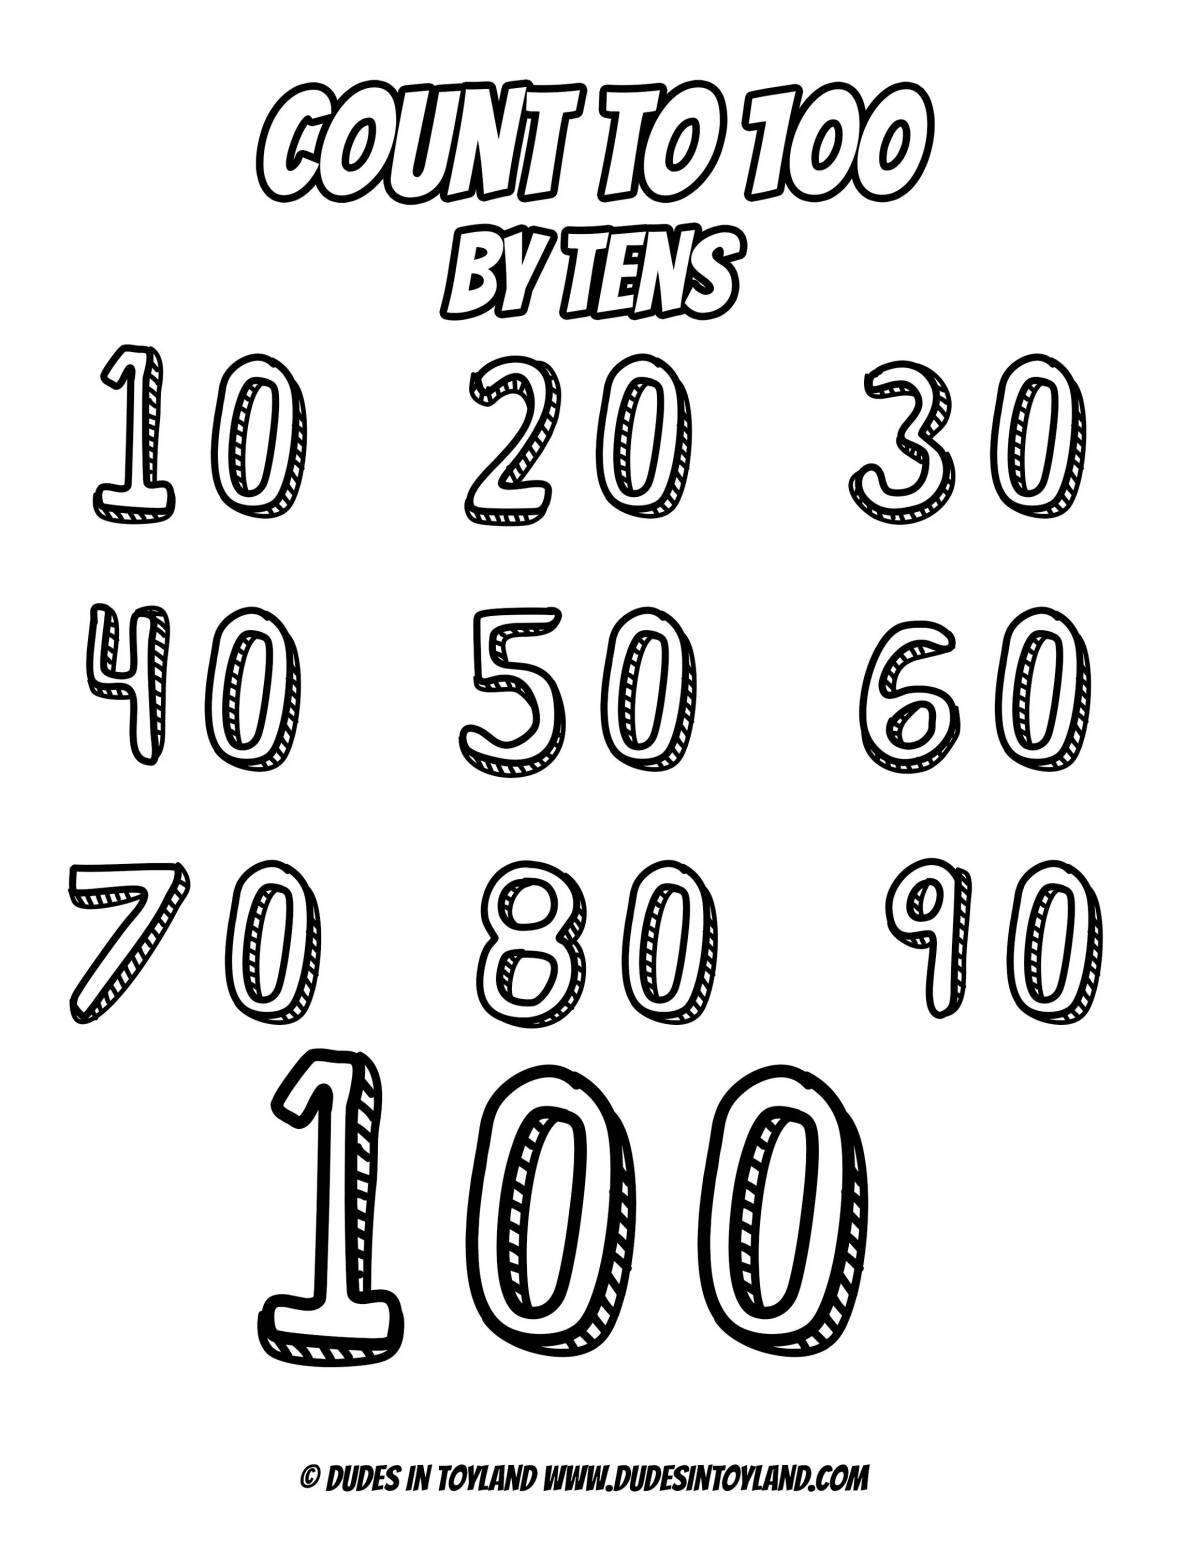 Vibrant coloring pages with page numbers up to 20